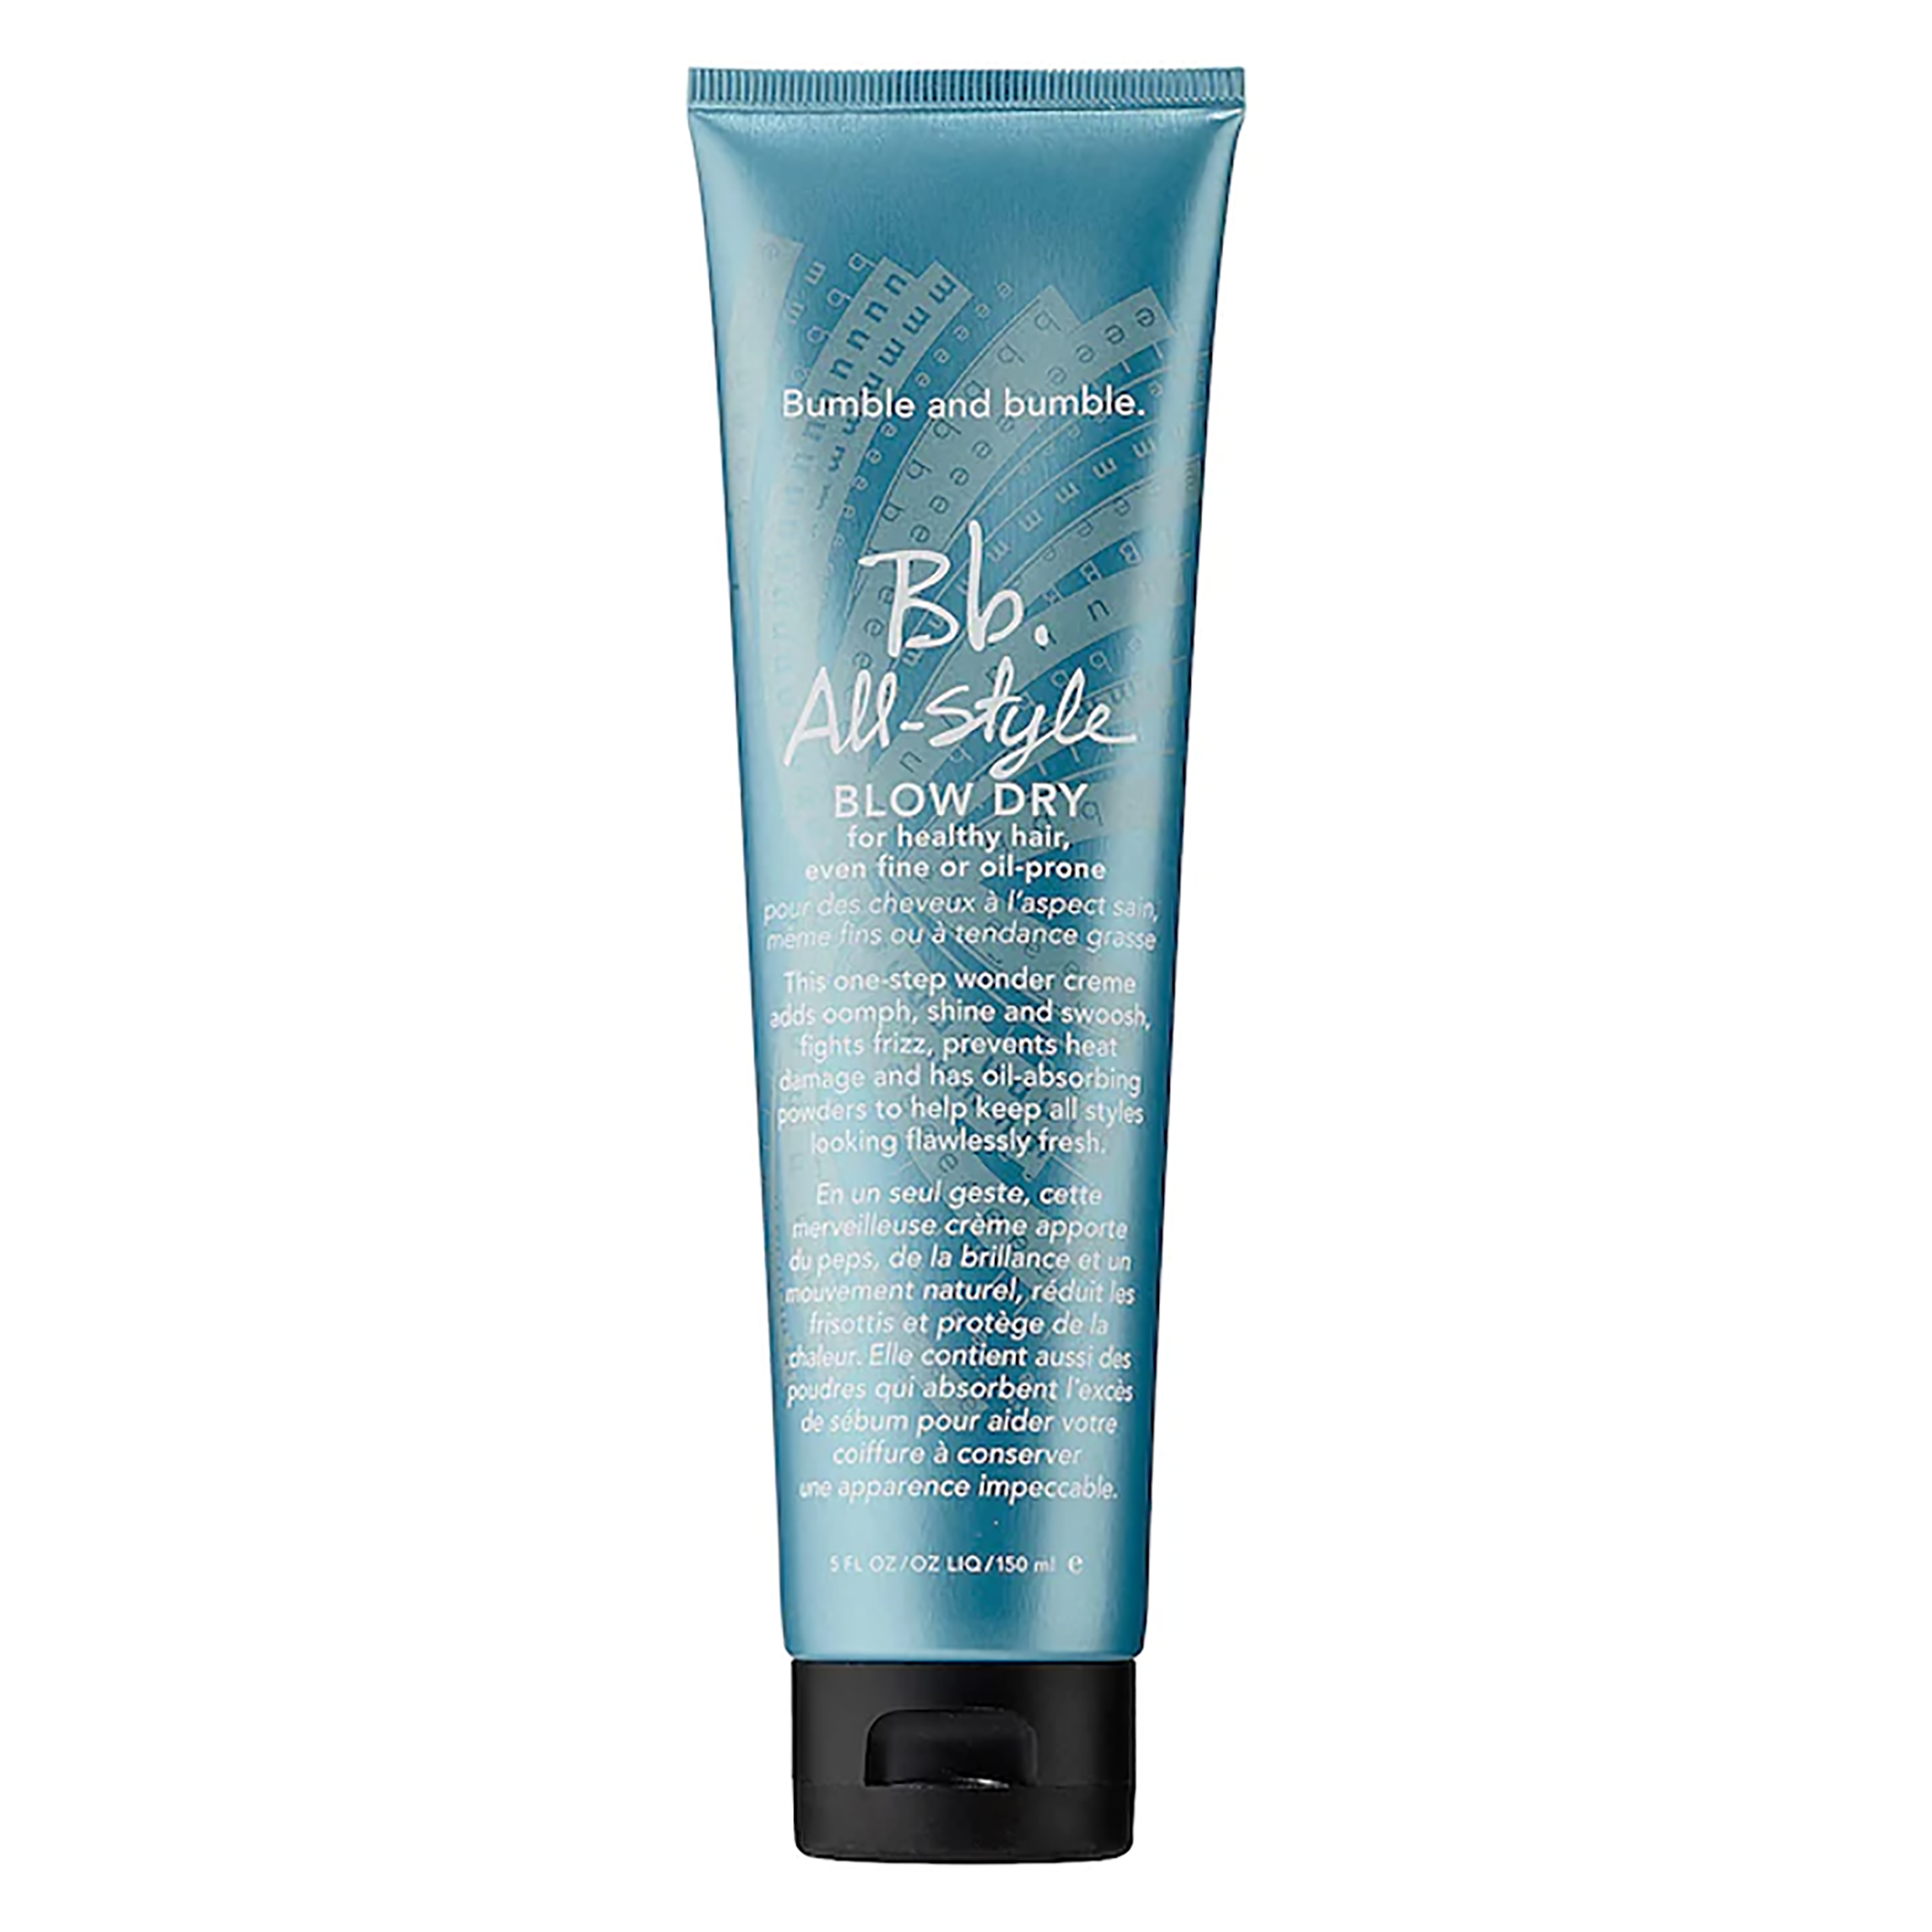 Bumble and bumble All-Style Blow Dry / 5OZ